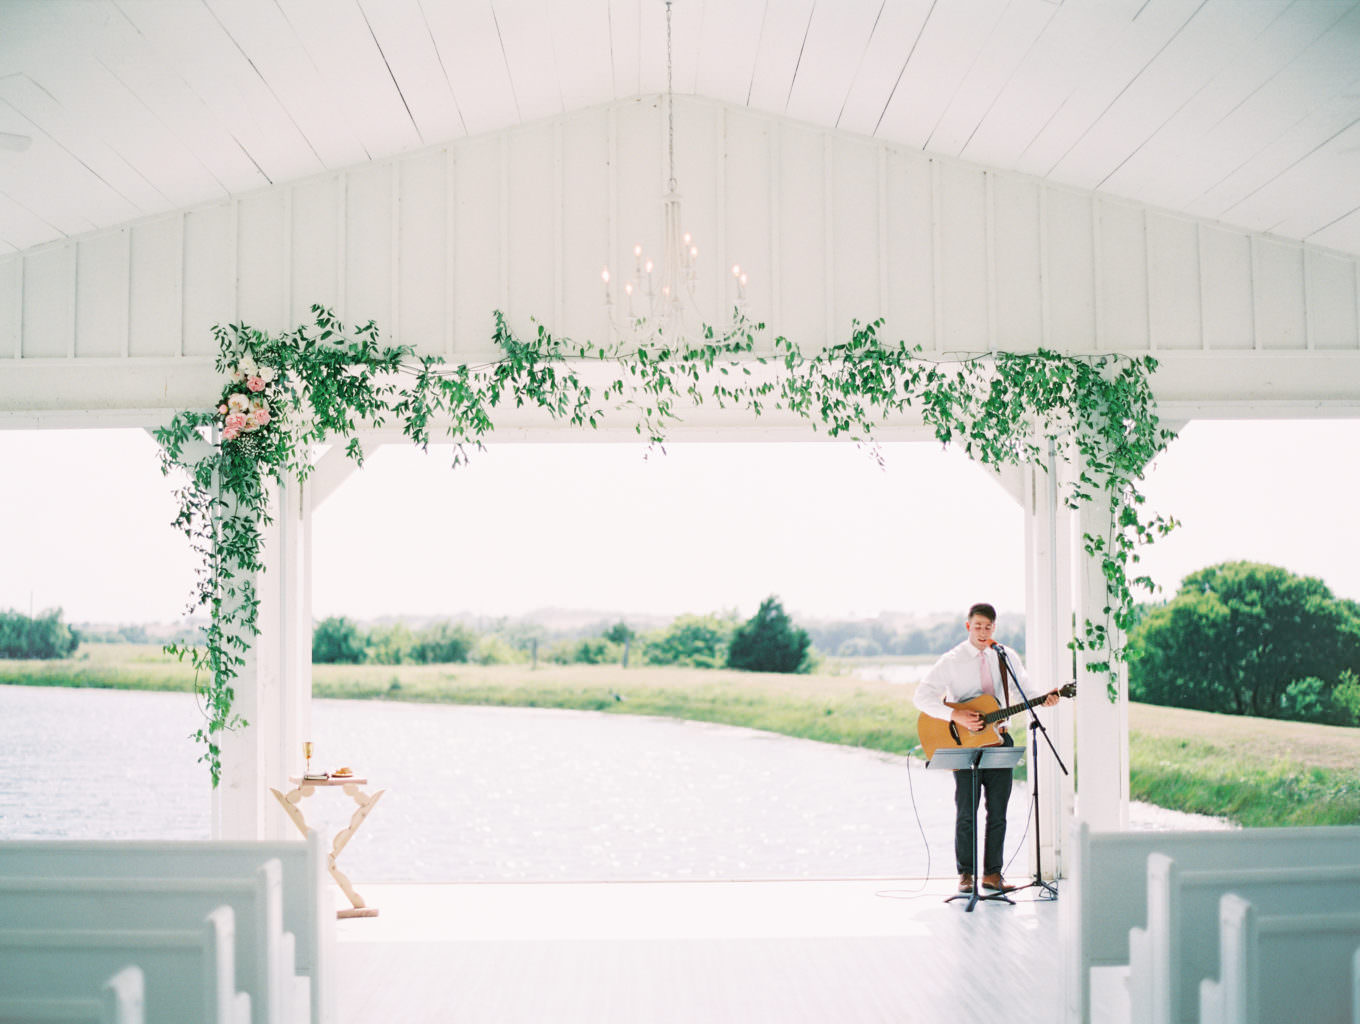 Musician with guitar at wedding ceremony set up, white chairs and green floral decor